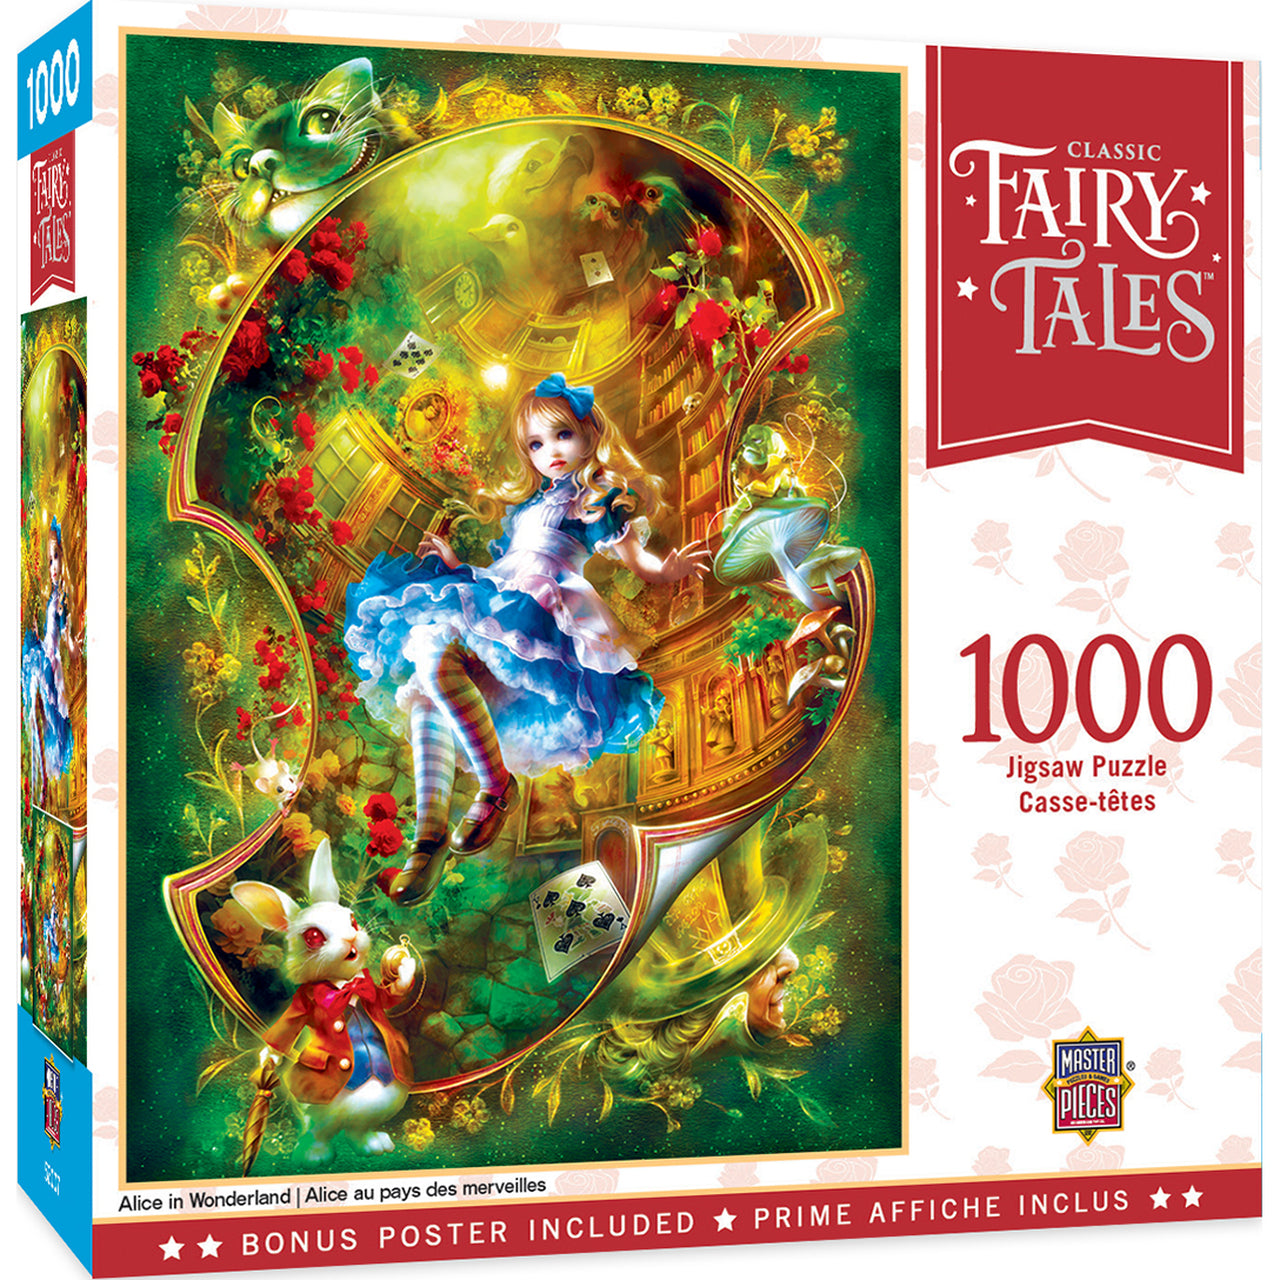 Classic Fairy Tales - Alice in Wonderland 1000 Piece Puzzle by Masterpieces